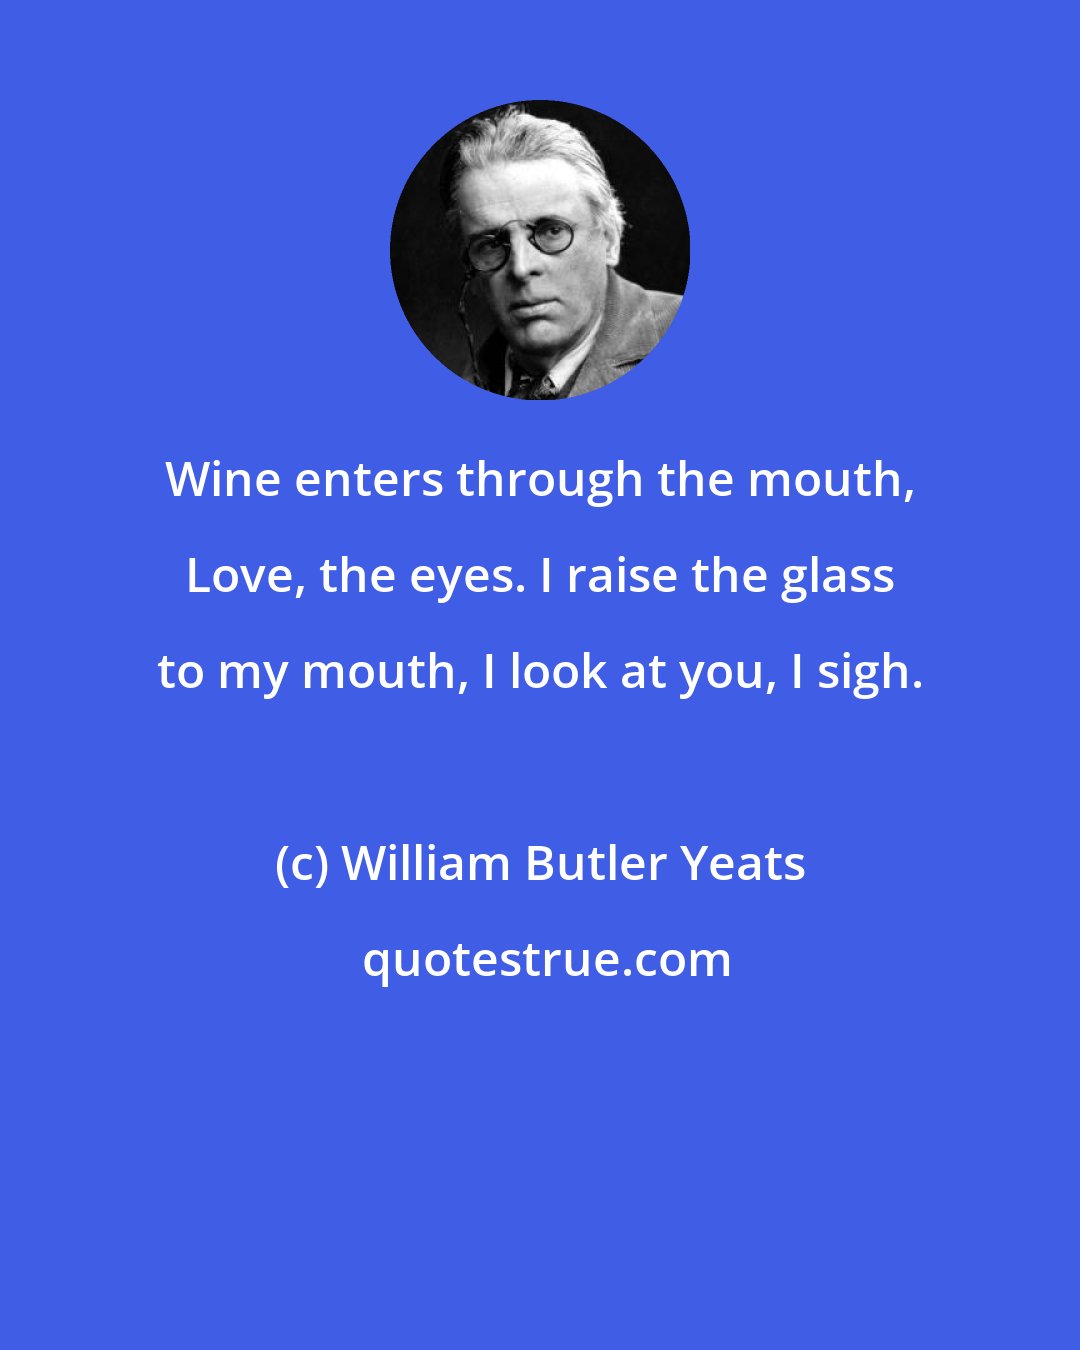 William Butler Yeats: Wine enters through the mouth, Love, the eyes. I raise the glass to my mouth, I look at you, I sigh.